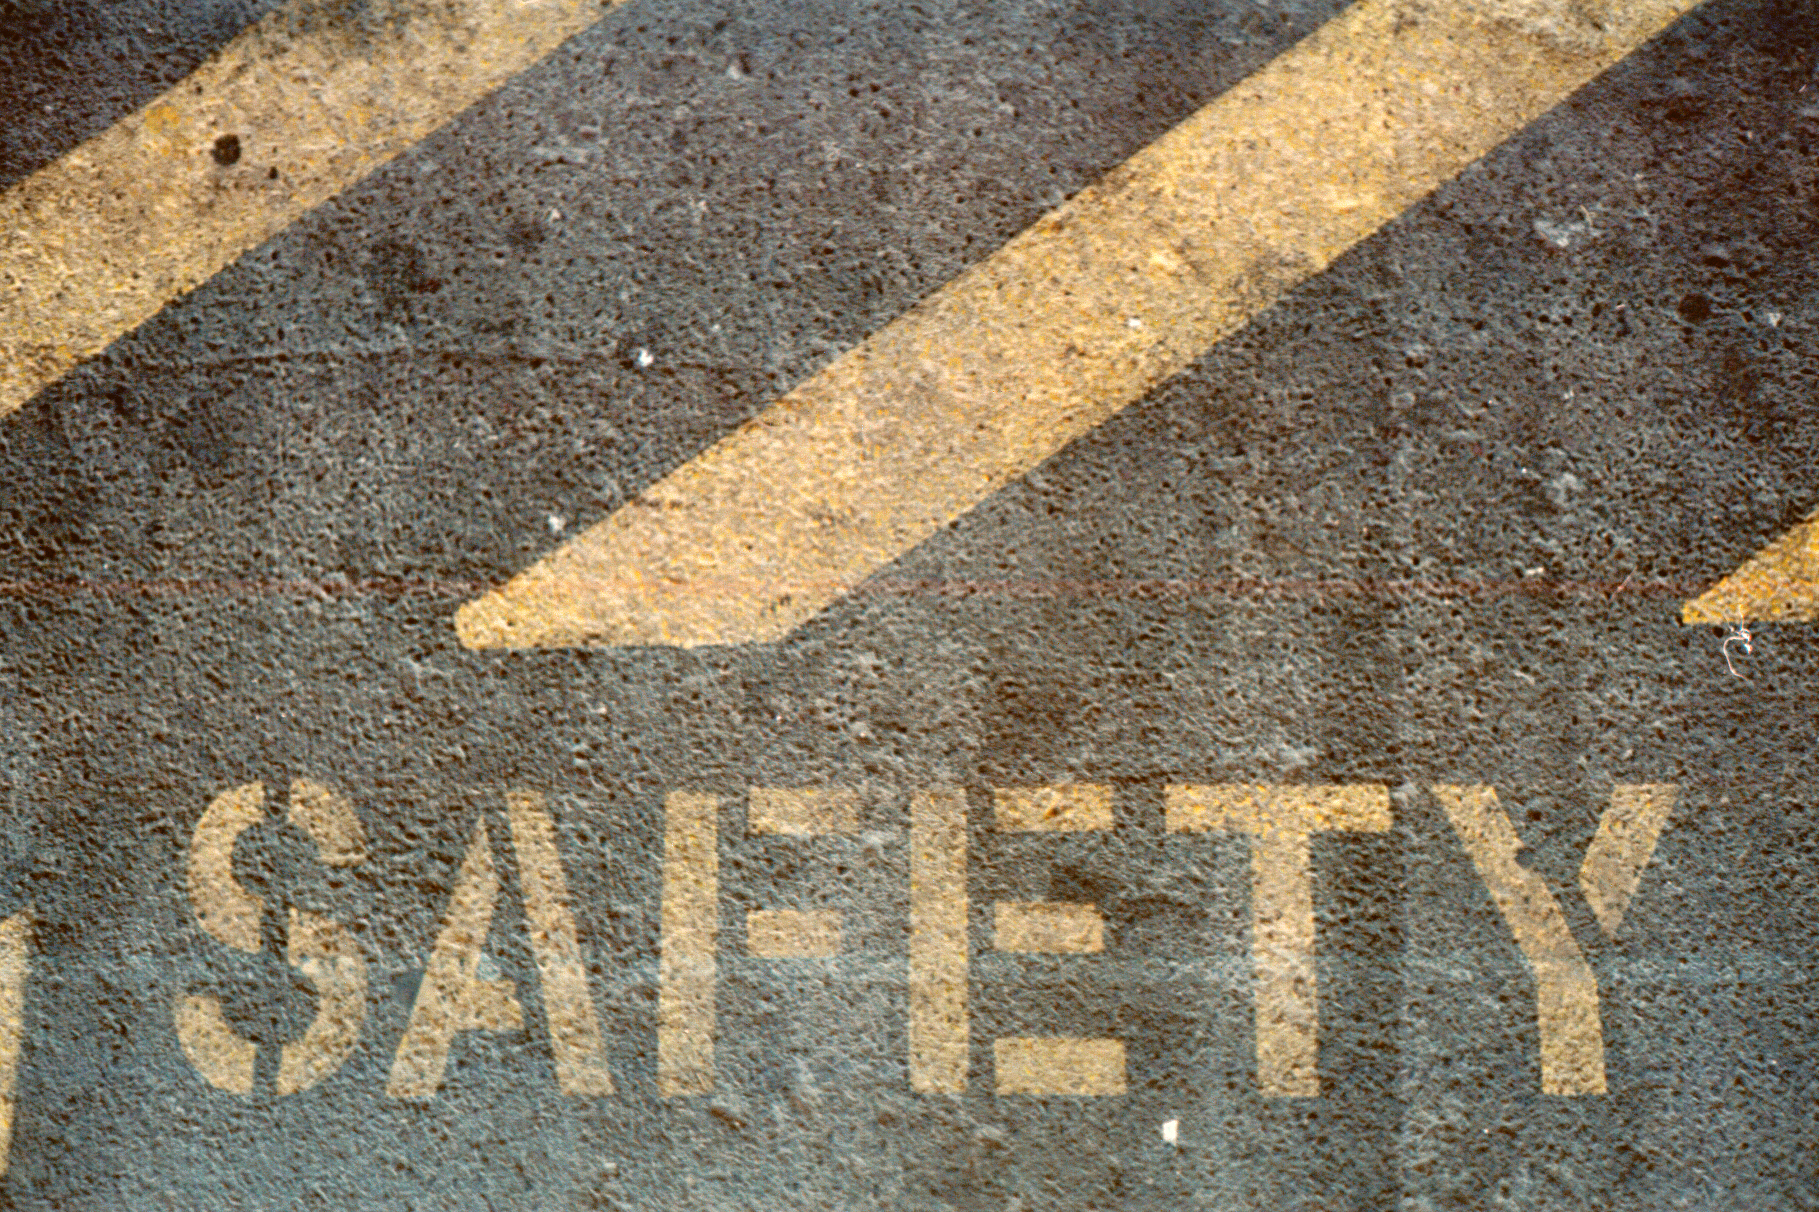 Common Material Handling Mishaps: How to Increase Warehouse Safety